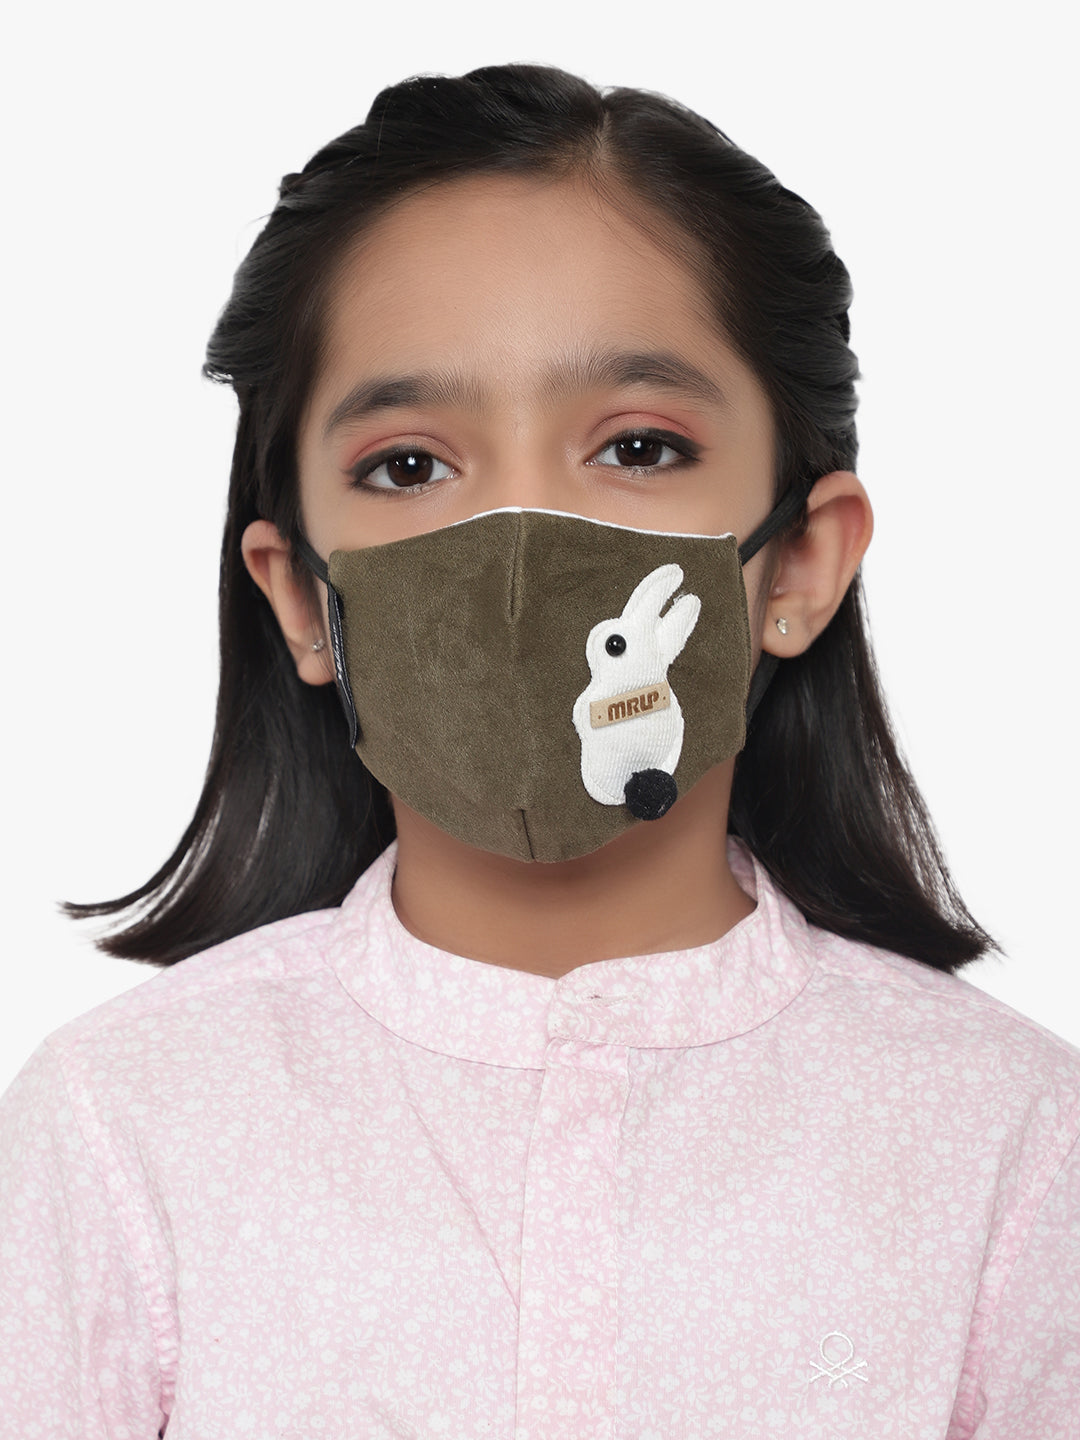 Kids 3 ply soft fabric Masks for Kids (Pack of 4)